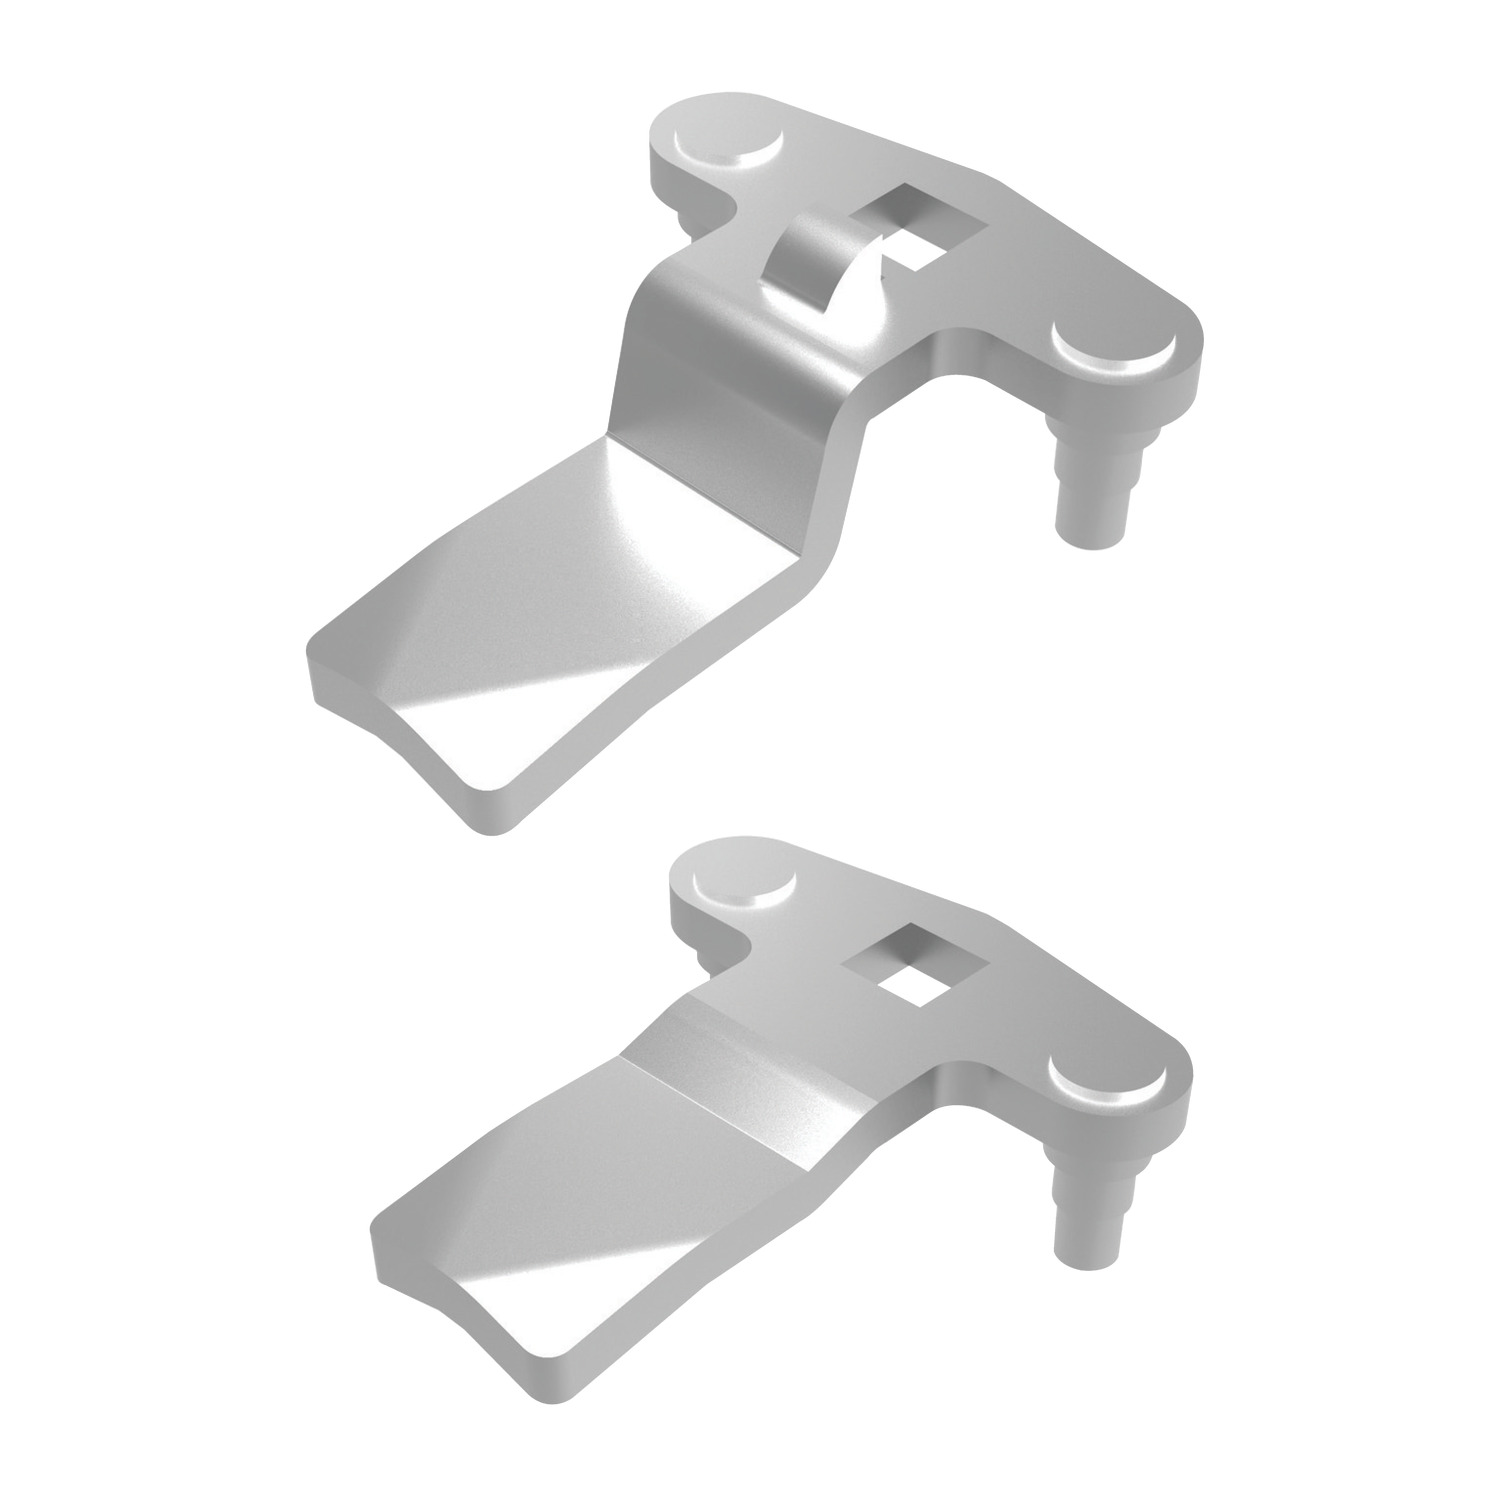 A0240.AW0110 Two Point Cams Flexi for 3-point latching - Steel, zinc plated - Without Projection